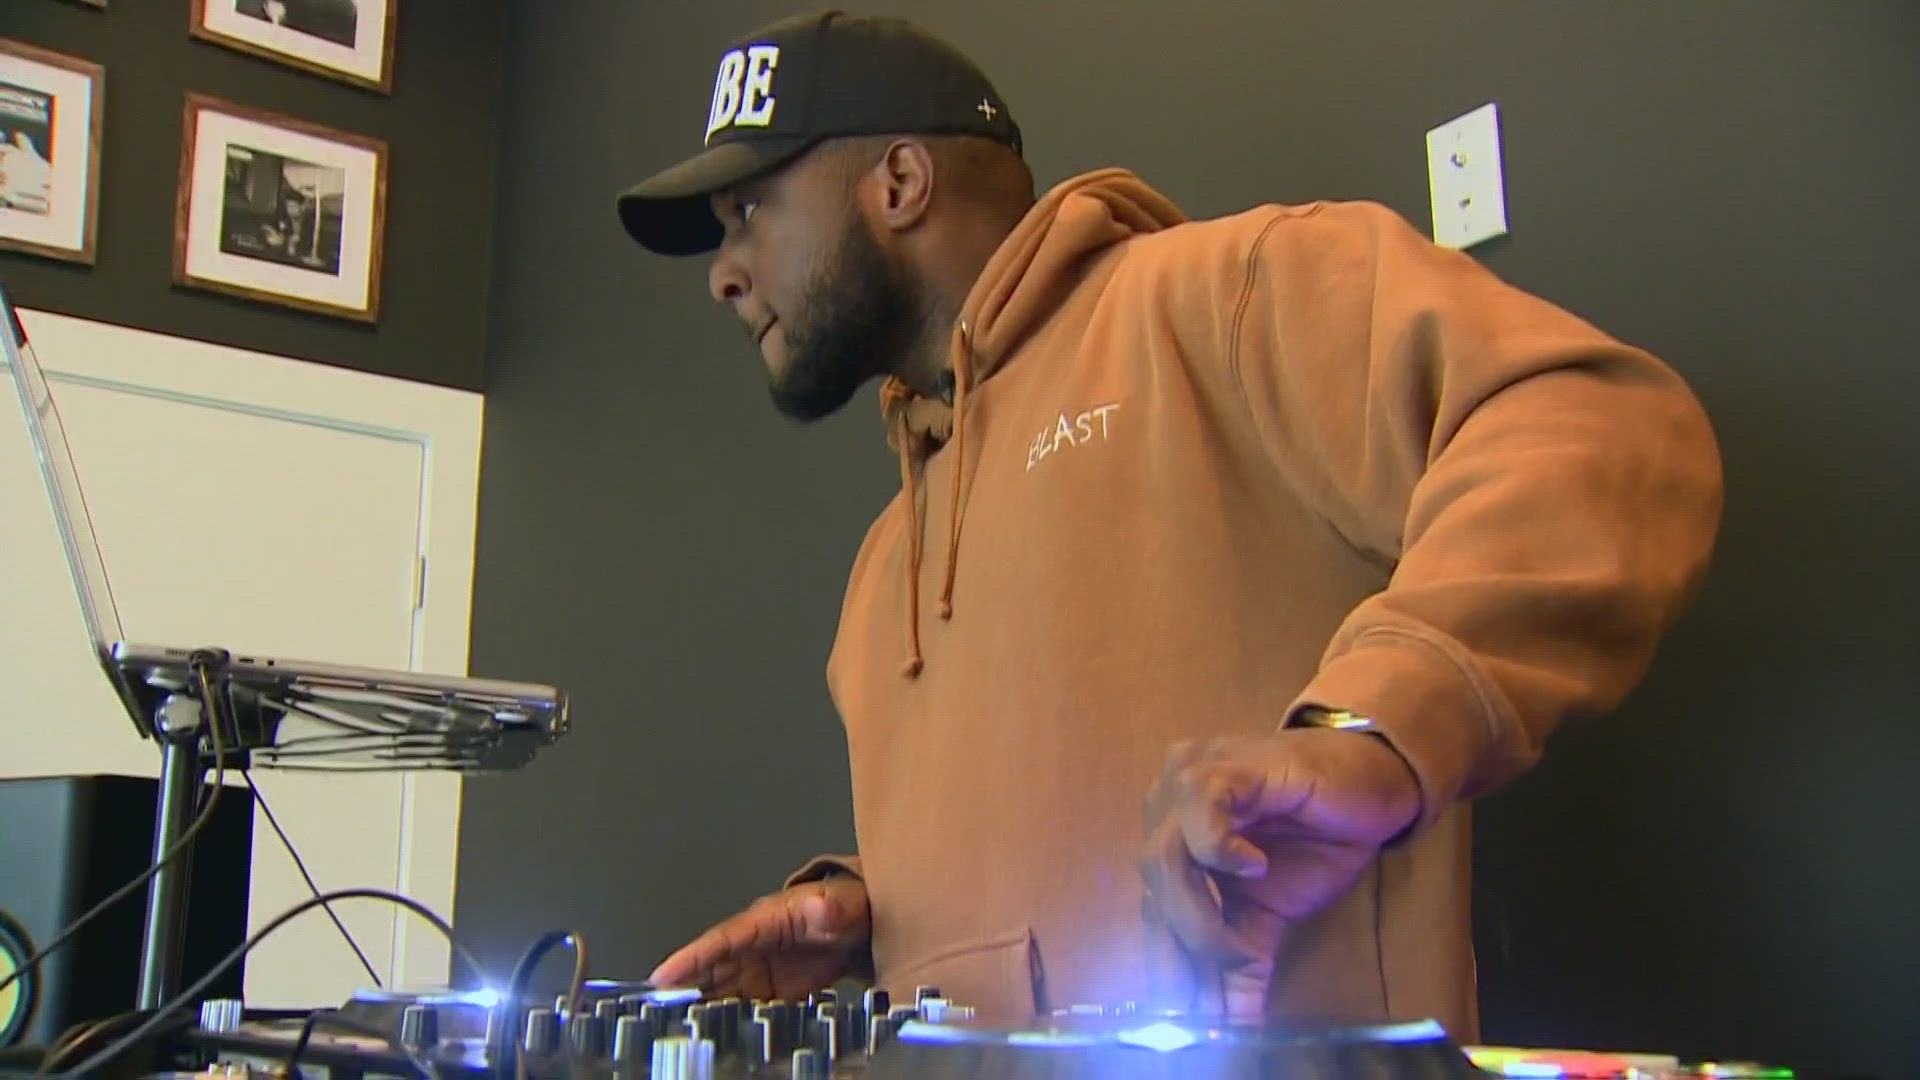 Microsoft engineer Bobby Akinboro thought Seattle should have more parties and places to hang out for Black people. He's bringing the community together as DJ Blast.